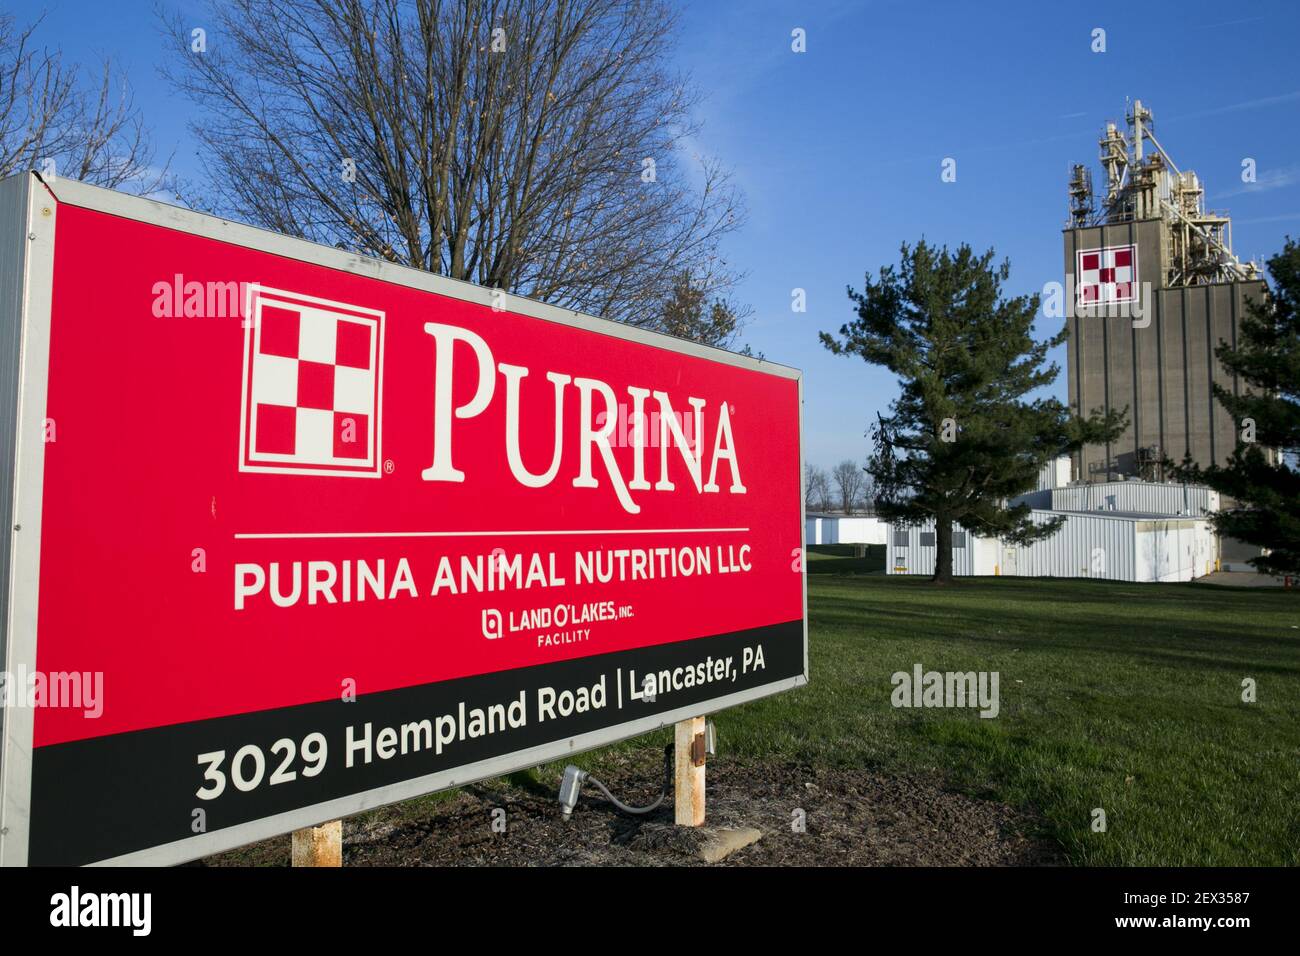 A logo sign outside of a facility occupied by Purina Animal Nutrition LLC,  a subsidiary of Land O'Lakes, Inc., in Lancaster, Pennsylvania on April 12,  2015. Photo credit: Kristoffer Tripplaar/ Sipa USA ***